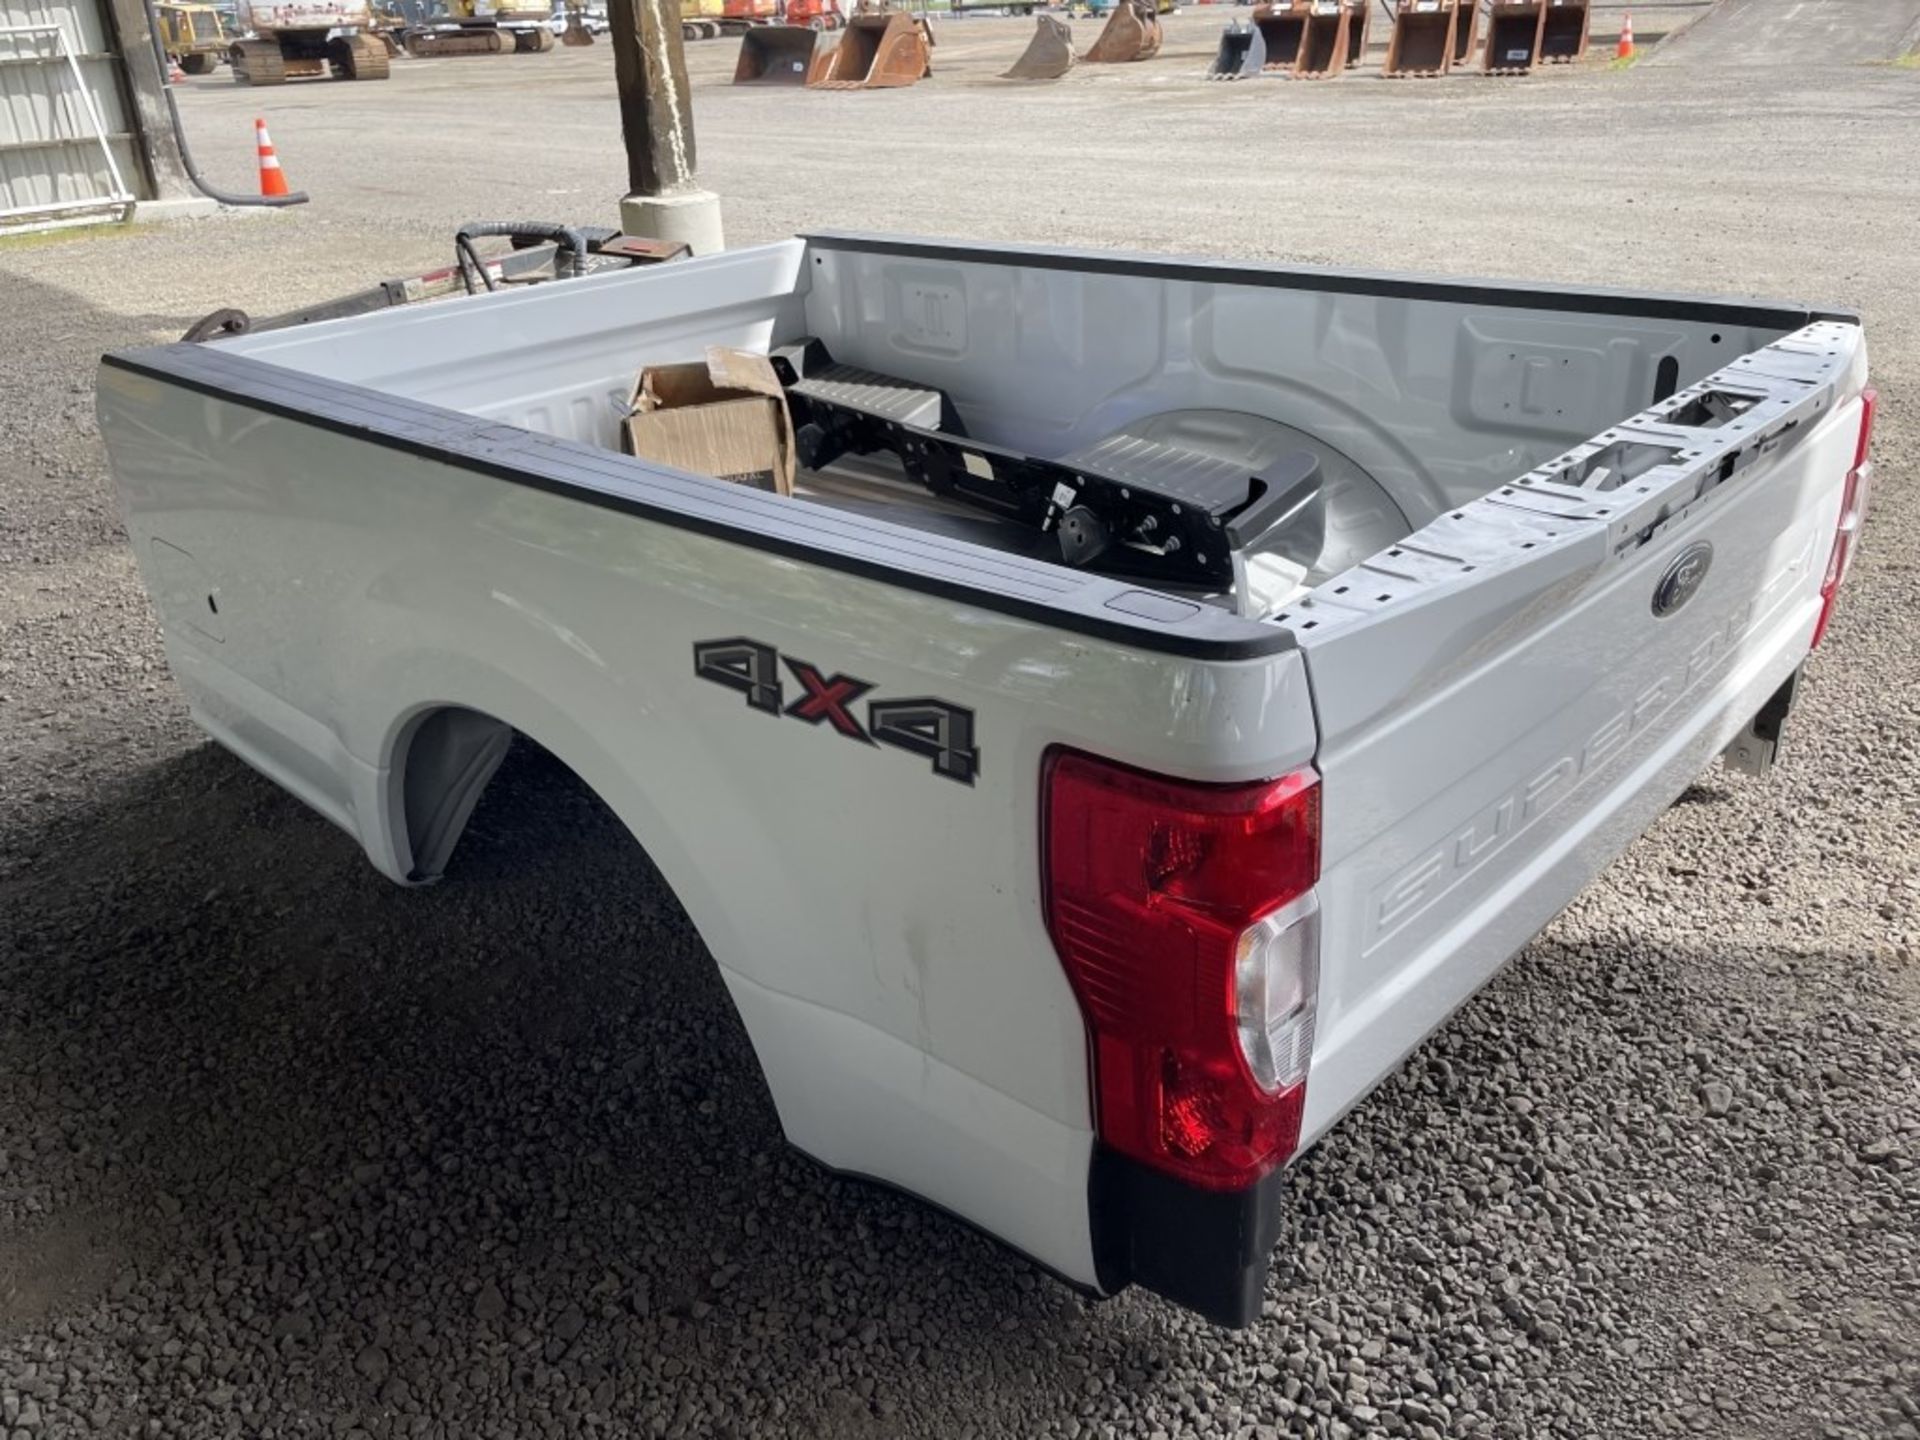 Ford Super Duty Pickup Bed - Image 2 of 5